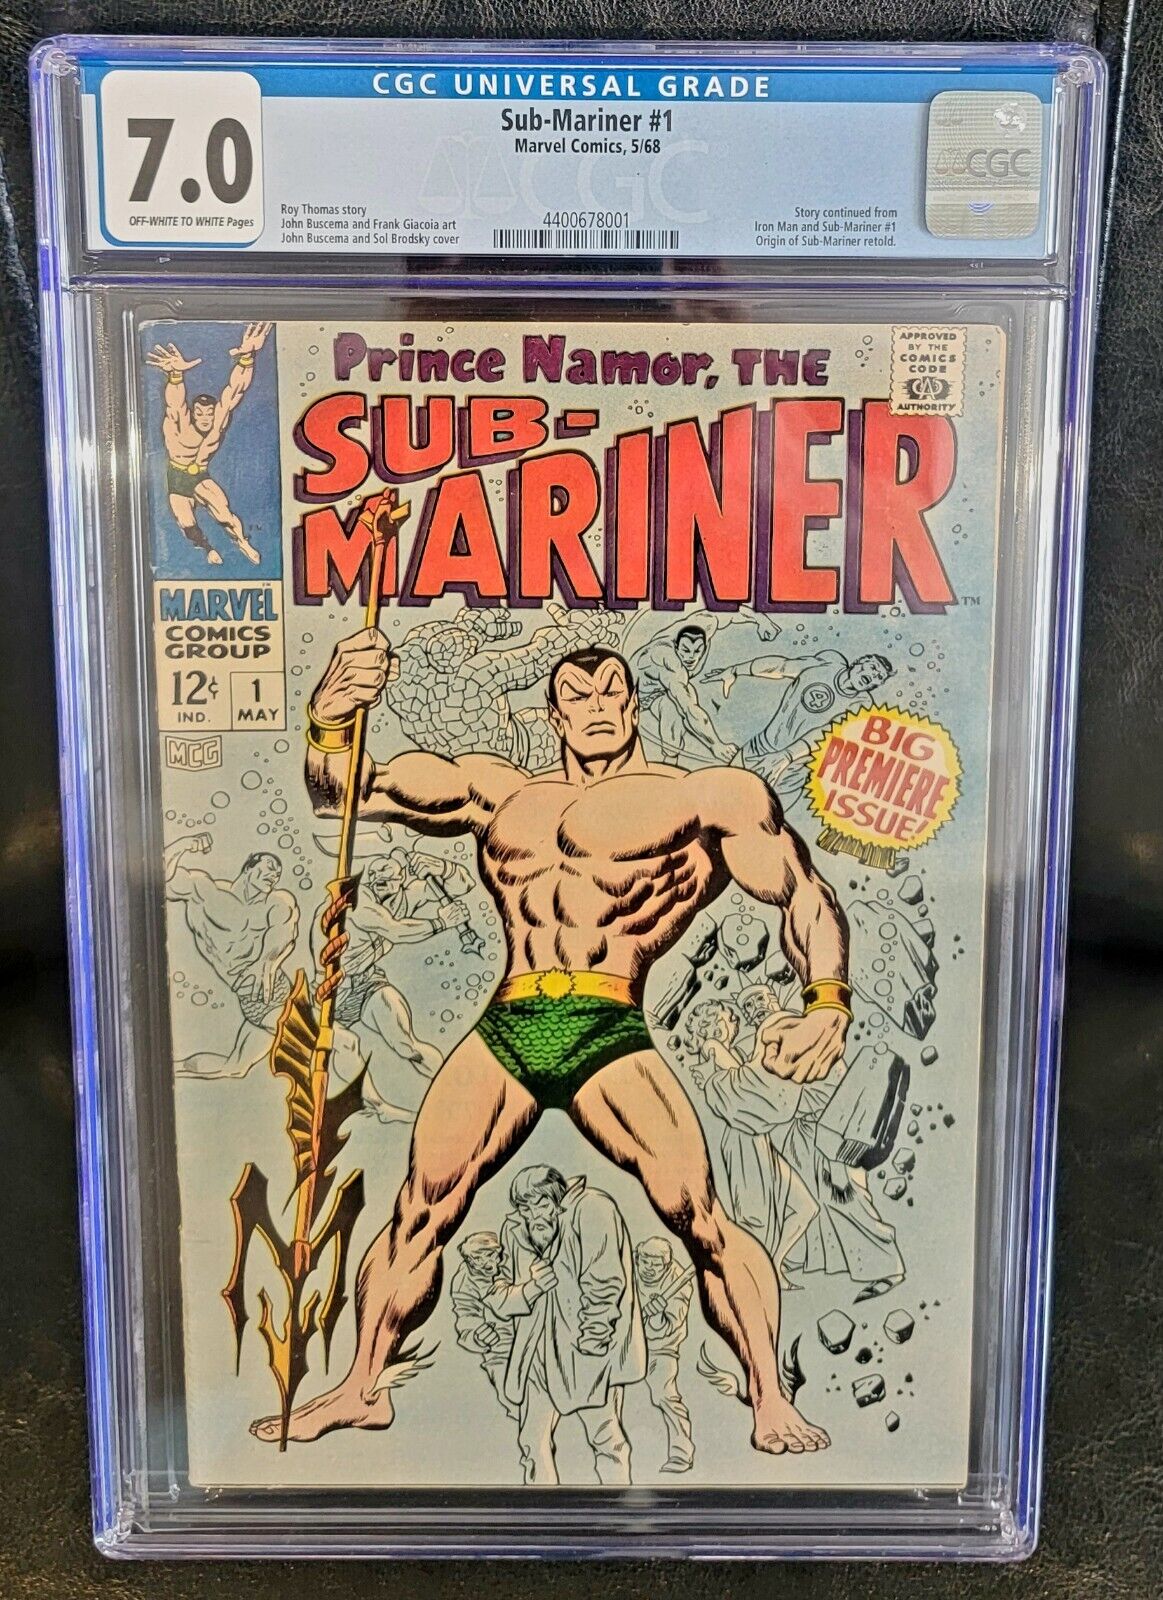 Sub-Mariner #1 High Grade First Issue Silver Age Marvel Comic 1968 CGC 7.0